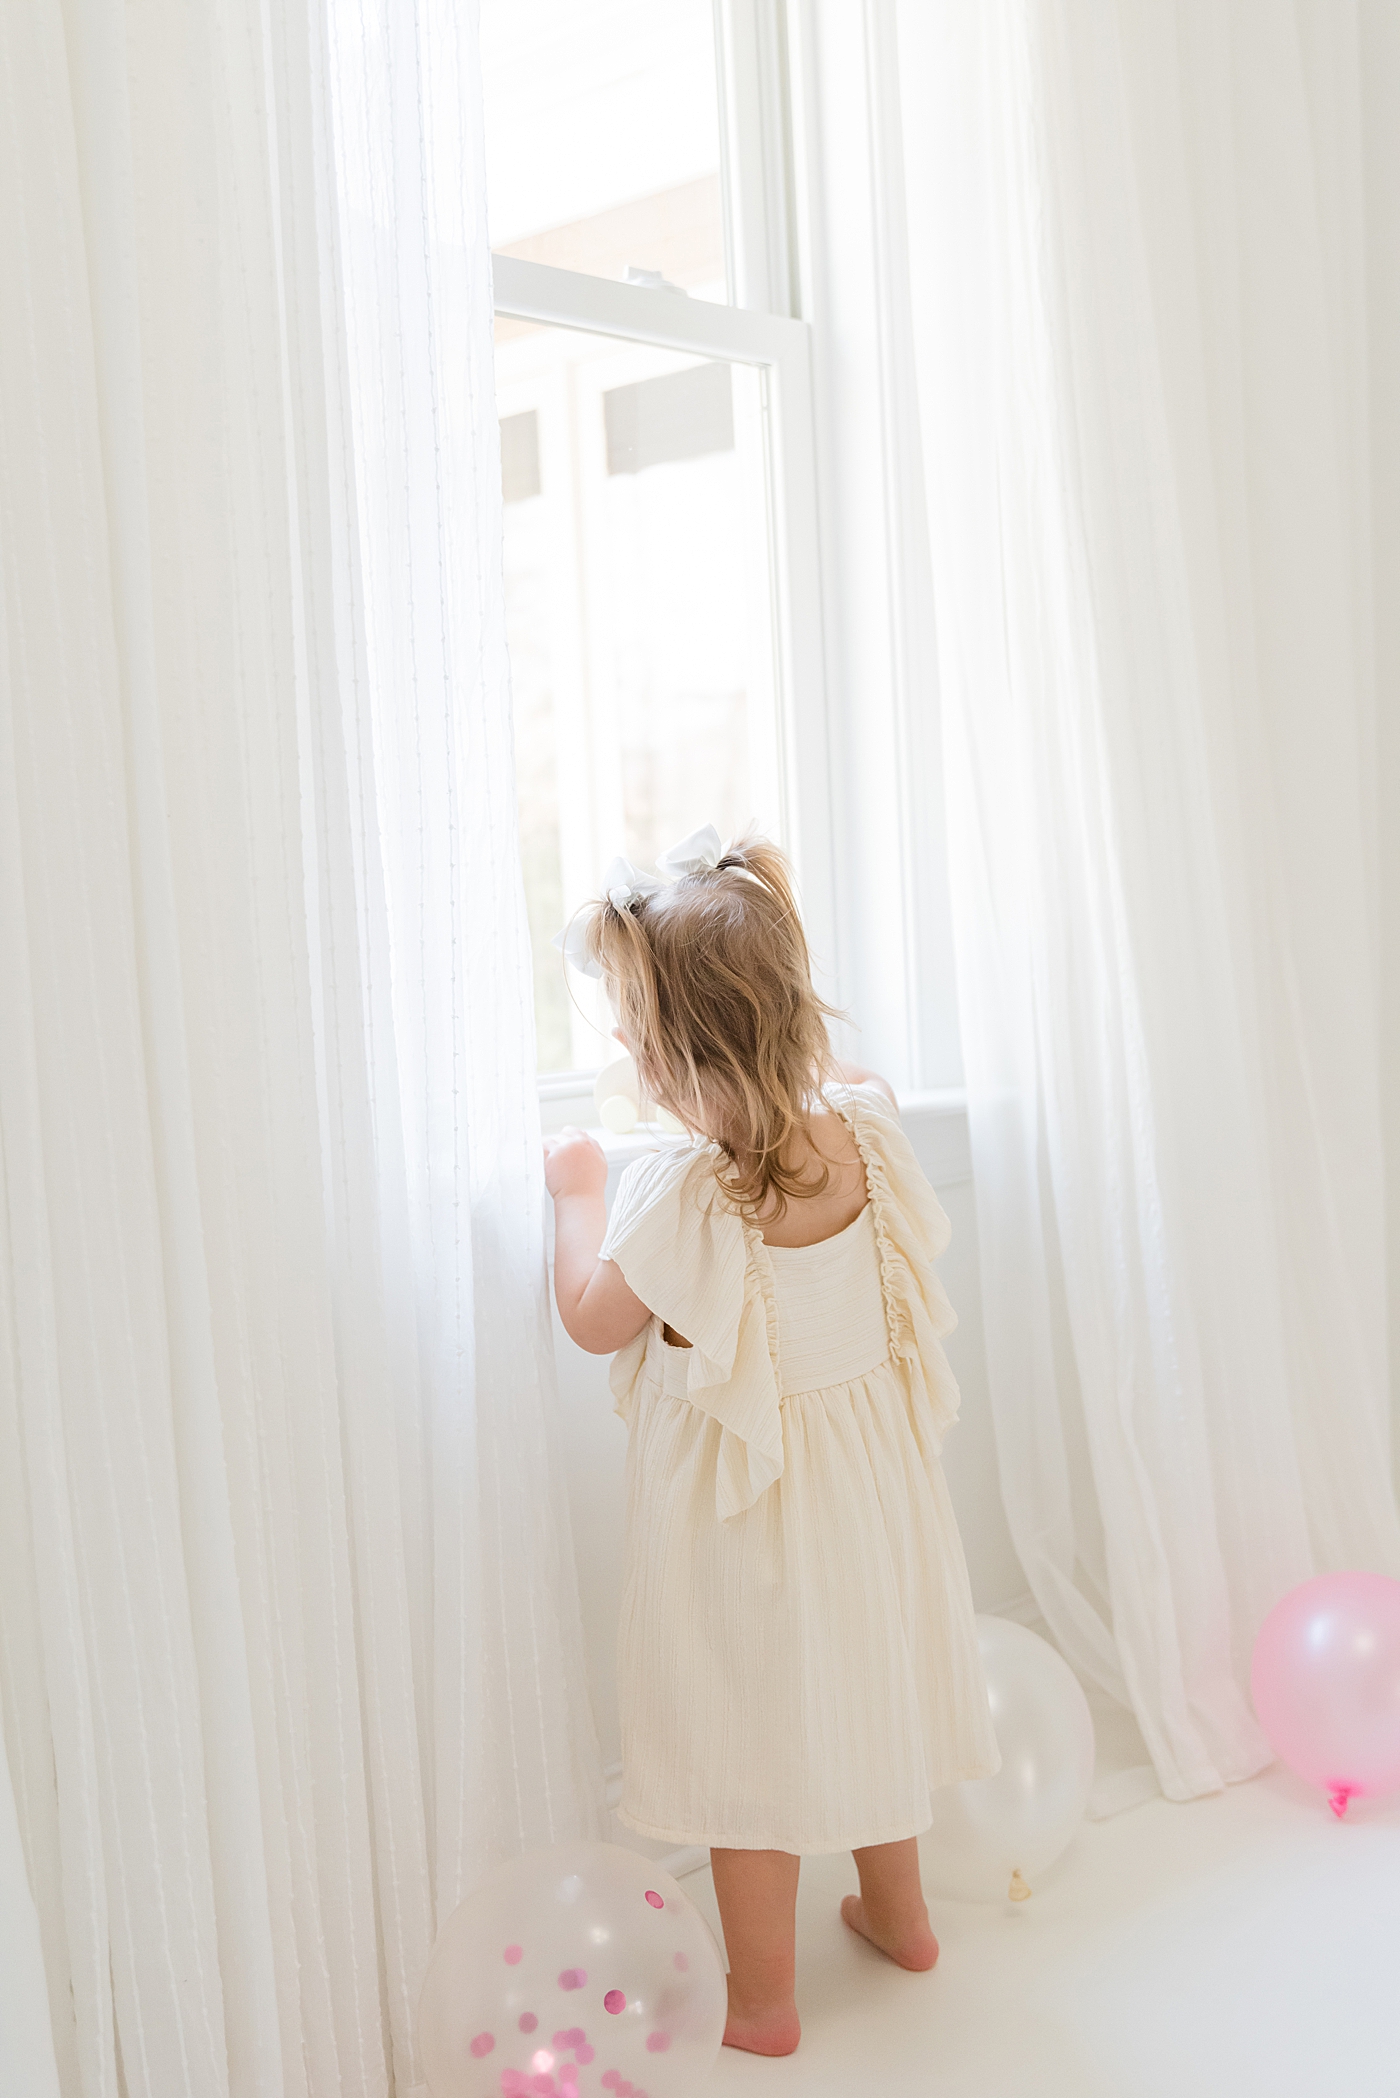 Little girl in a white dress looking out a window | Photo by Anna Wisjo Photography